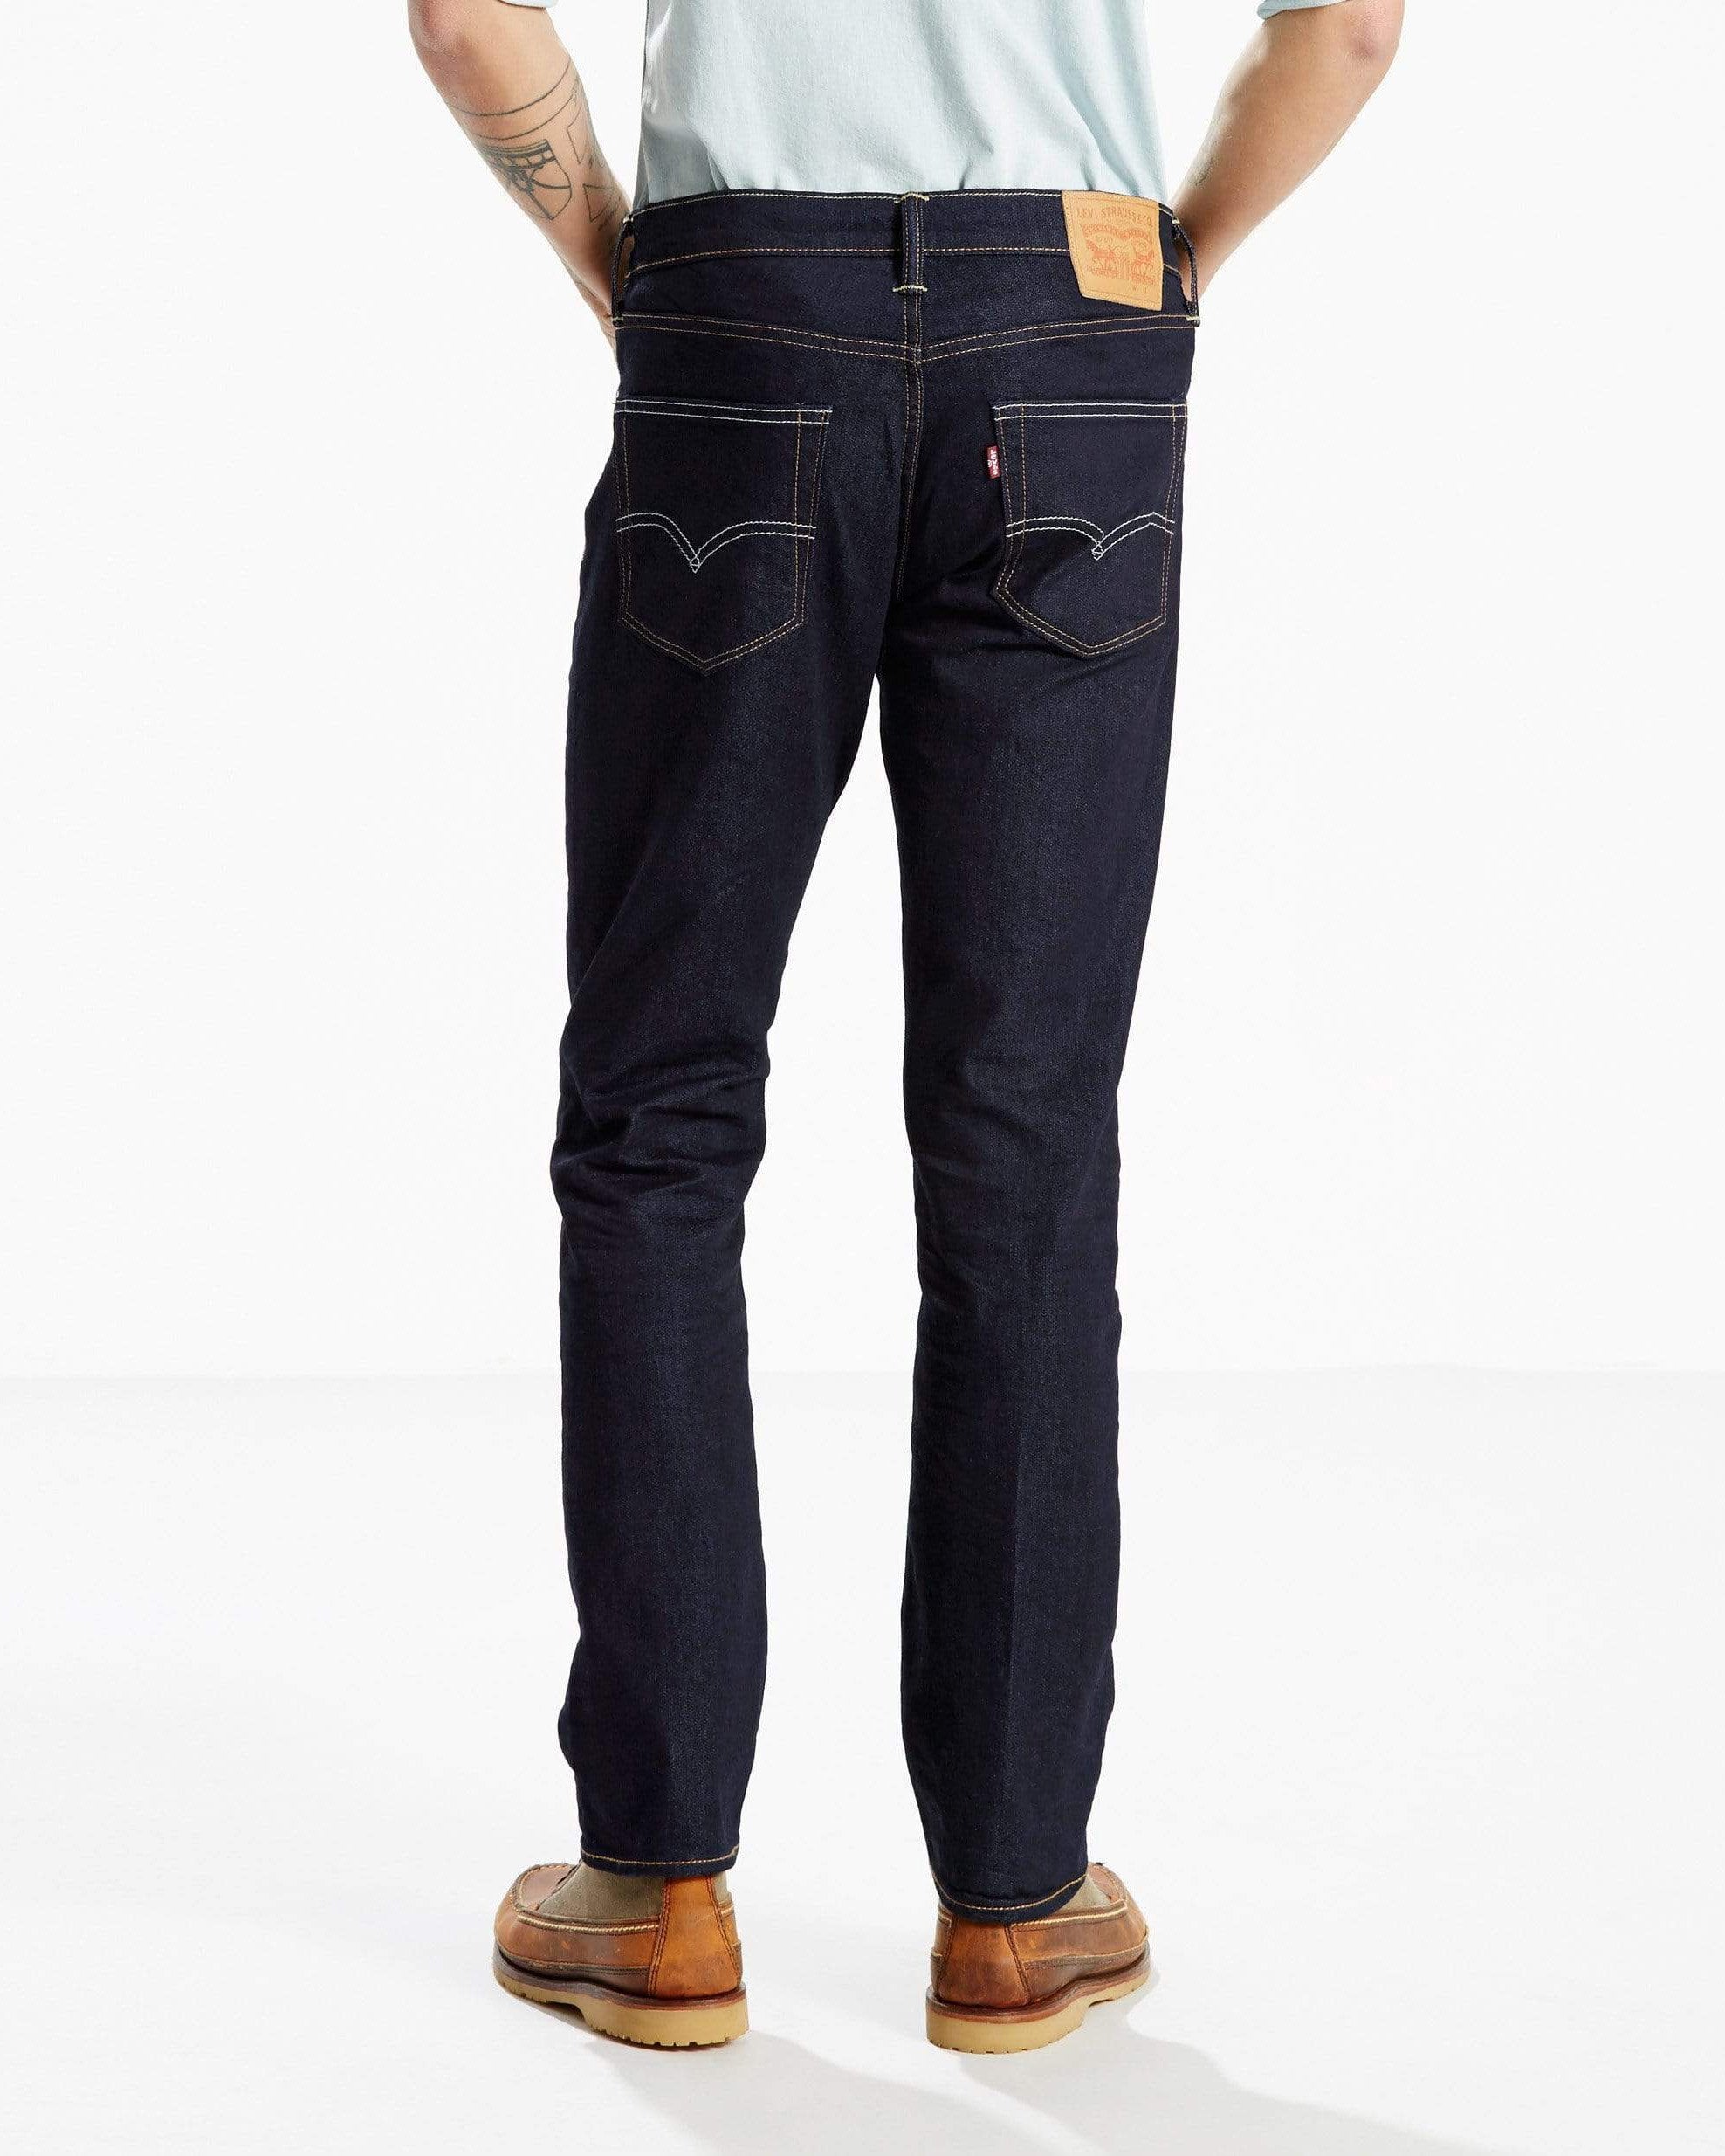 Levis 511 STRONG Slim Fit Mens Jeans - Rock Cod - Jeans and Street Fashion  from Jeanstore